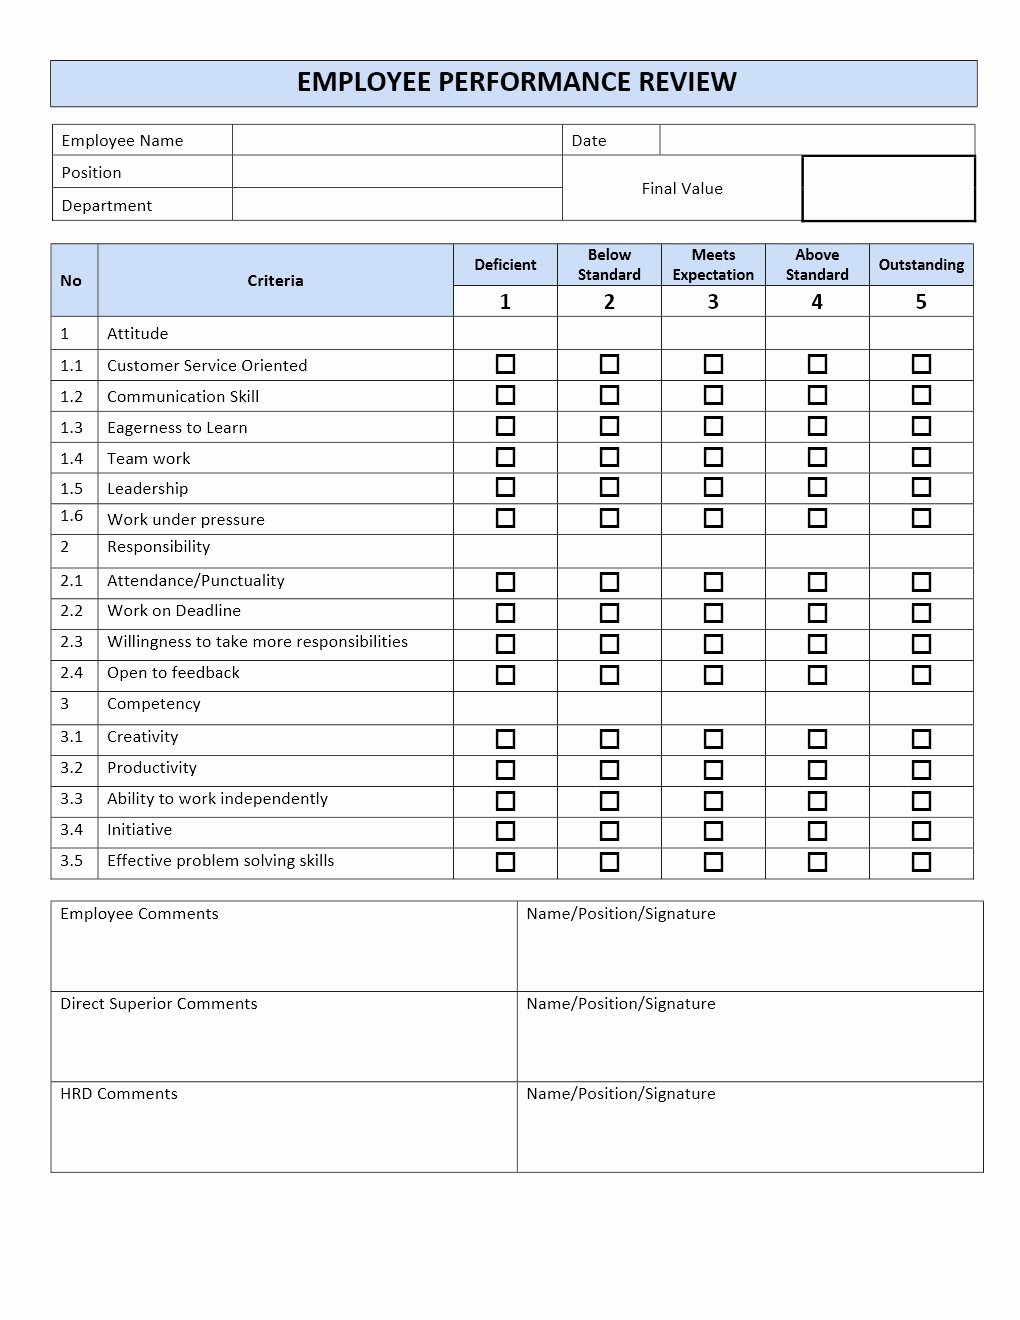 Employee Performance Review Template Excel Beautiful Employee Performance Review form